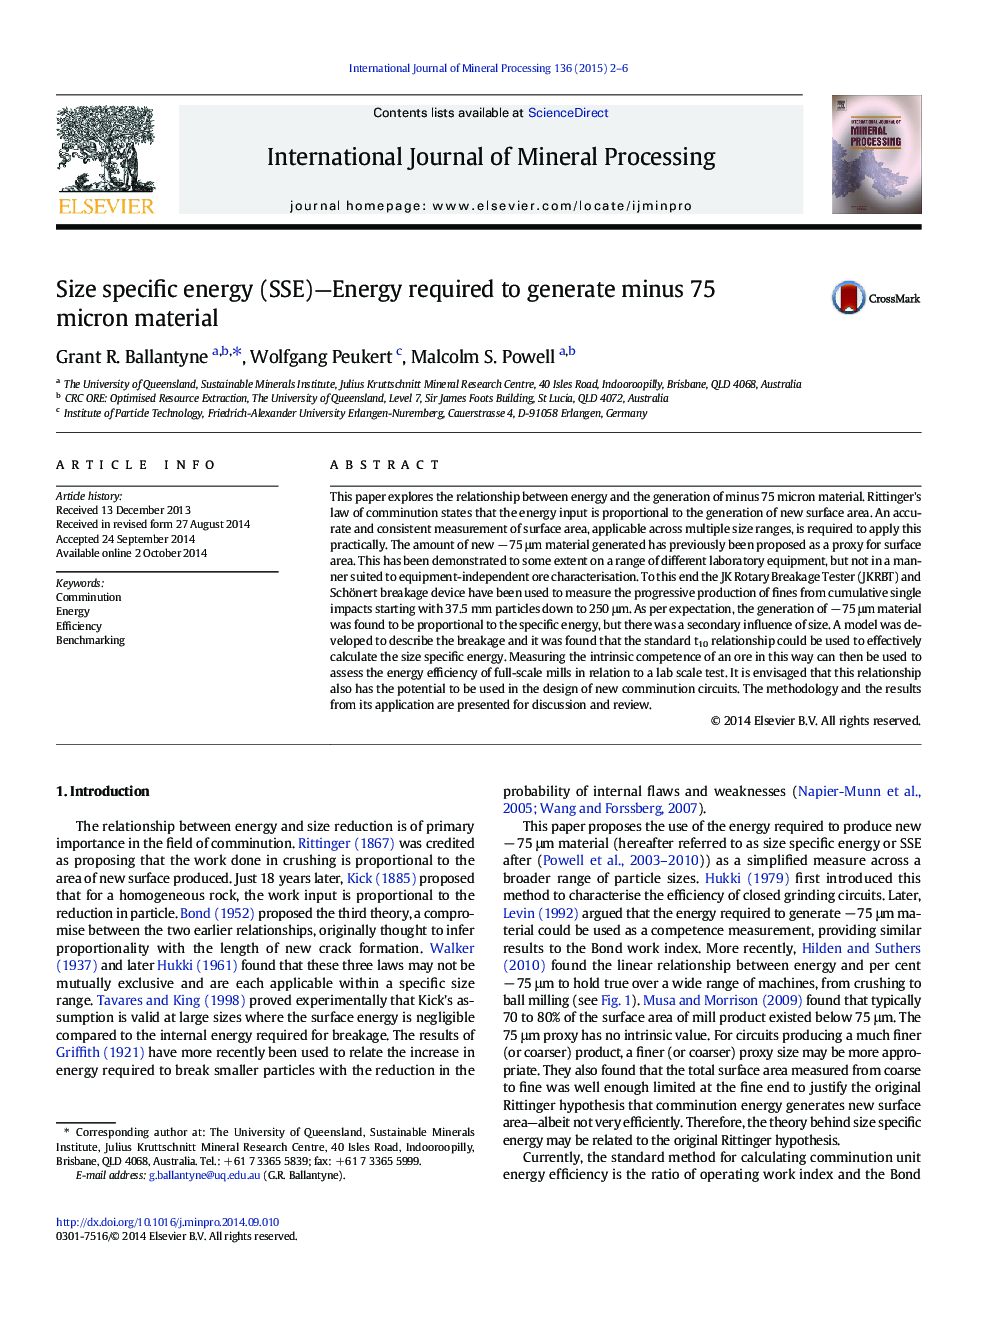 Size specific energy (SSE)—Energy required to generate minus 75 micron material